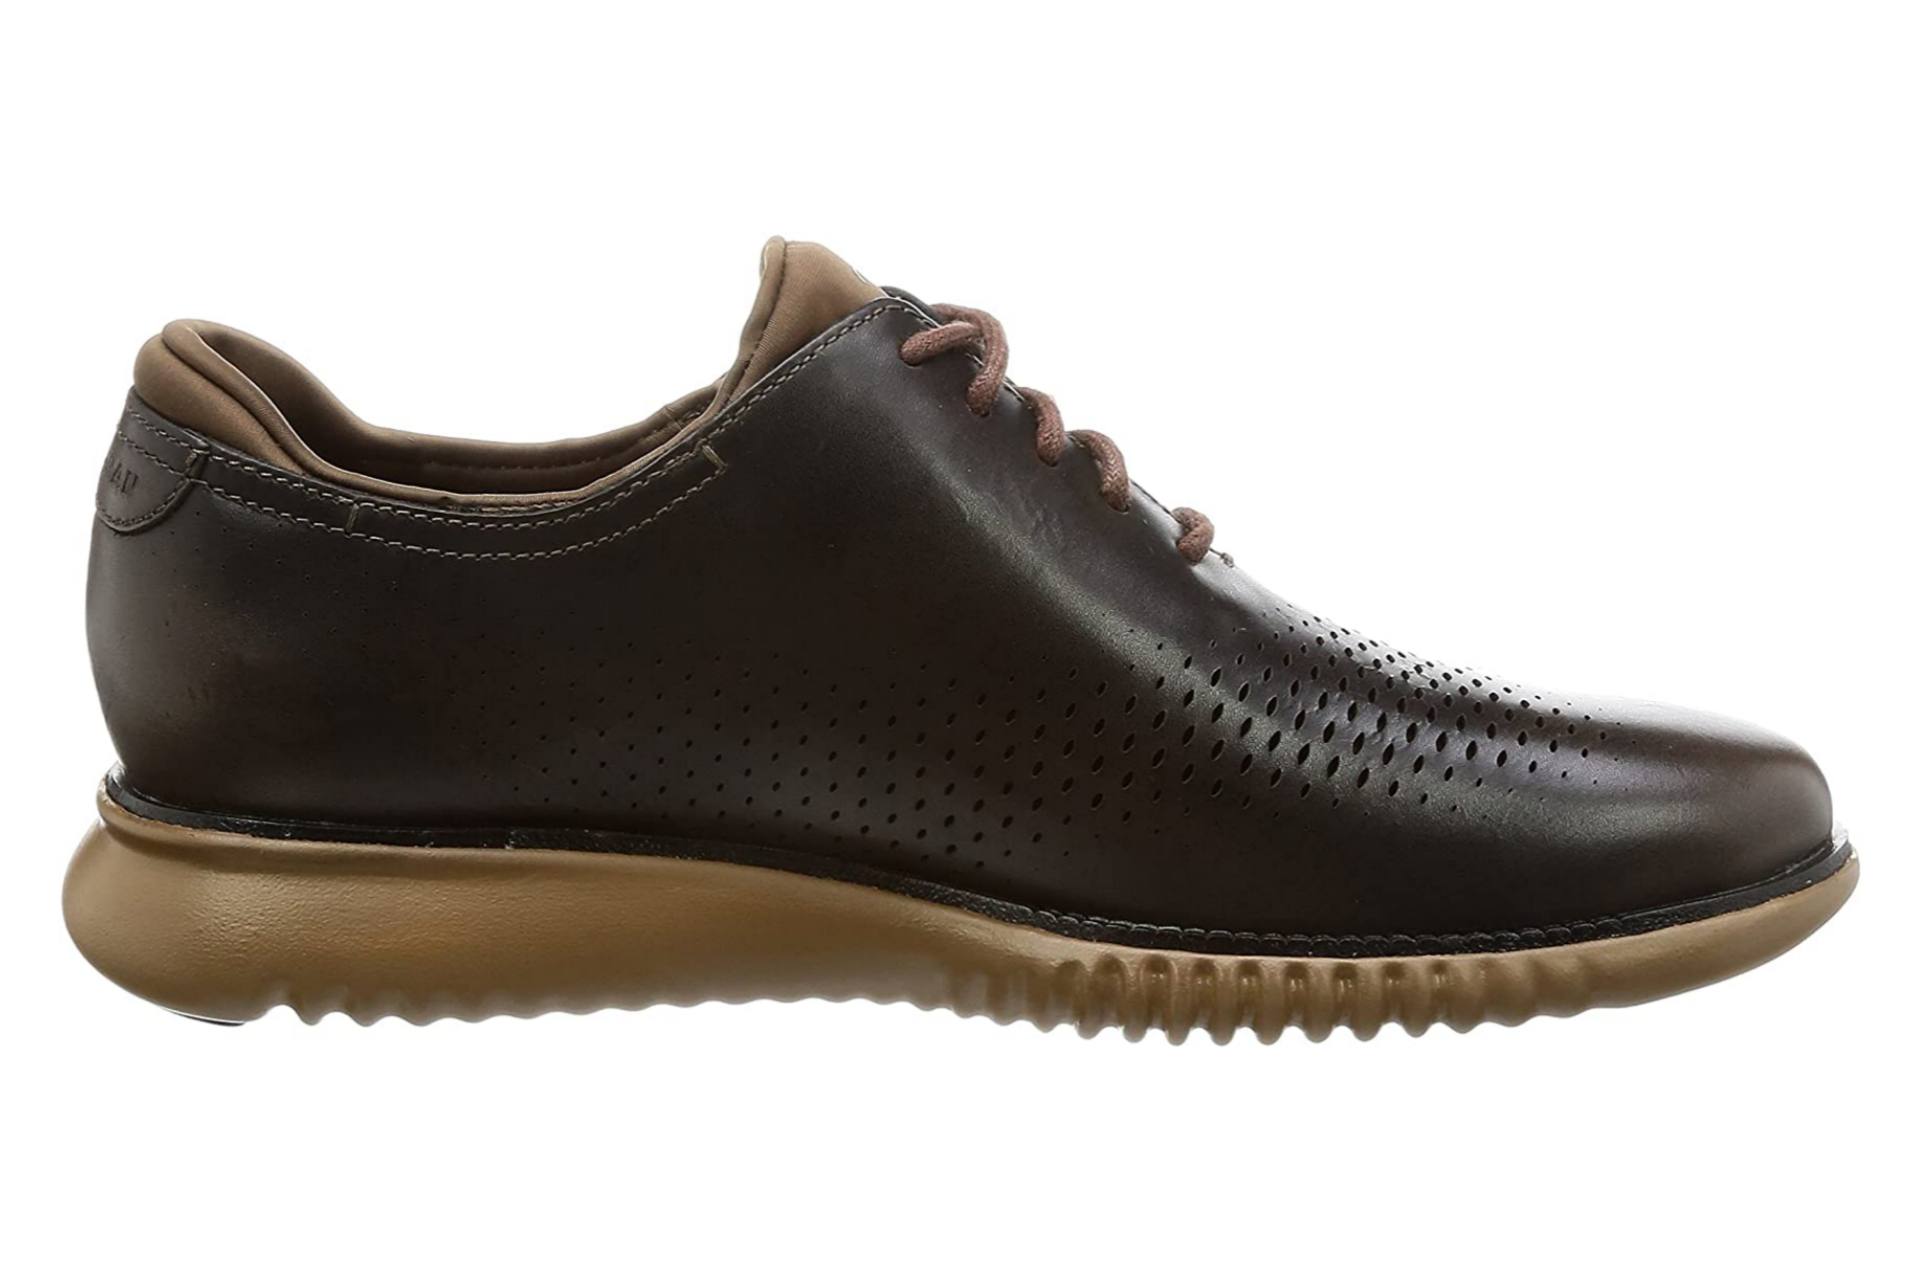 Best casual oxford shoes for men